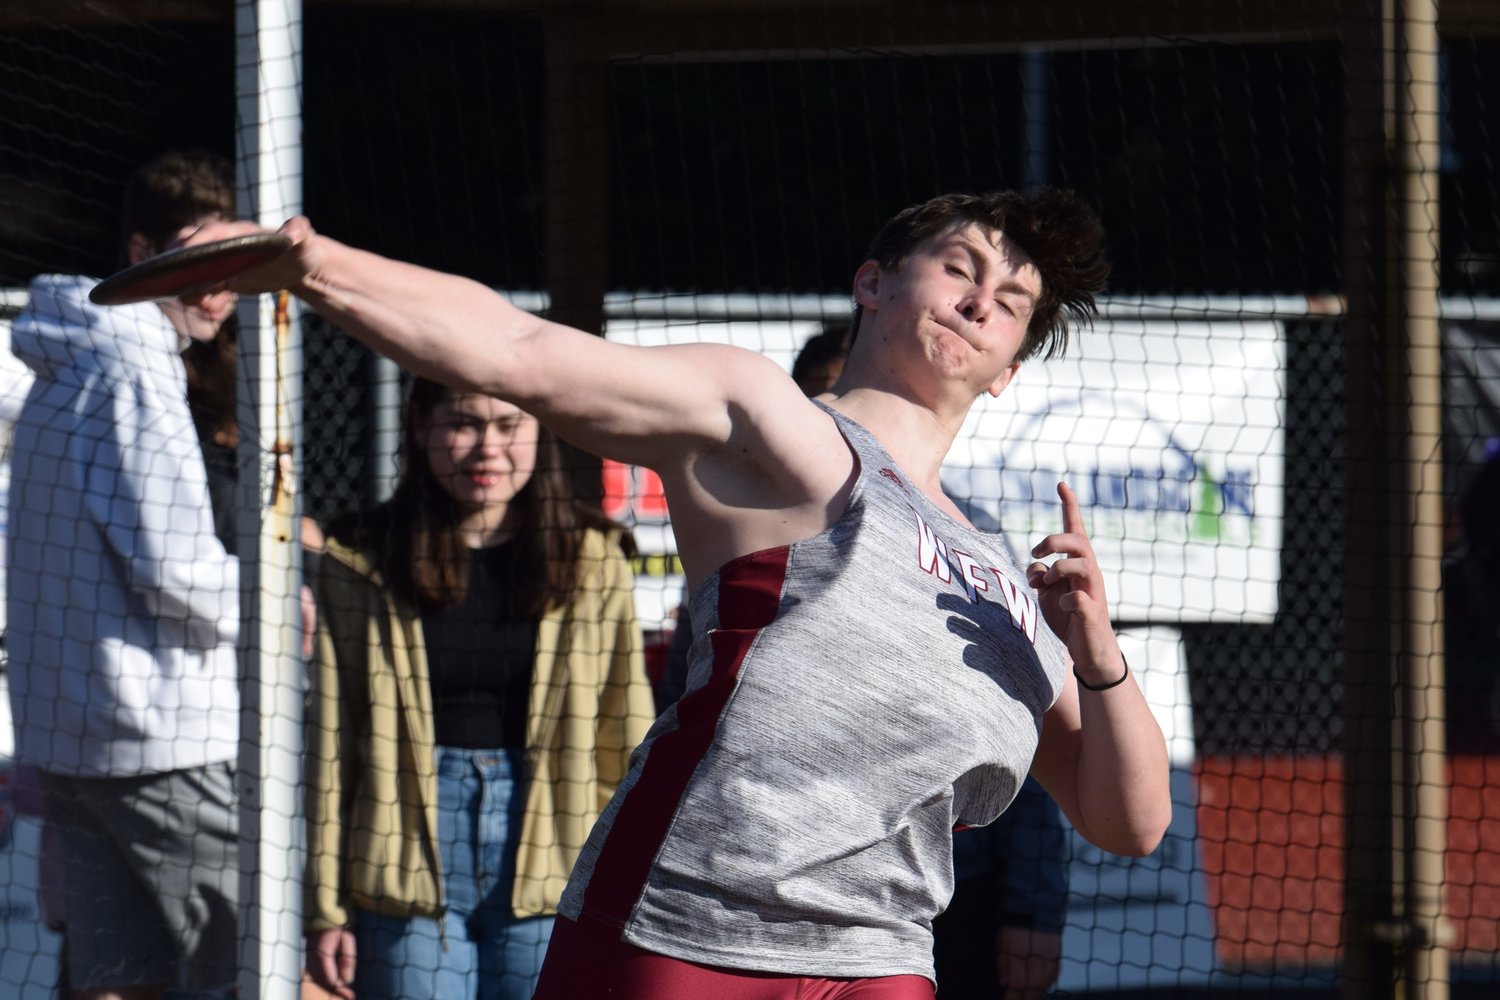 Mason Dowling throws the discus at W.F. West's dual meet at Tumwater on March 21.